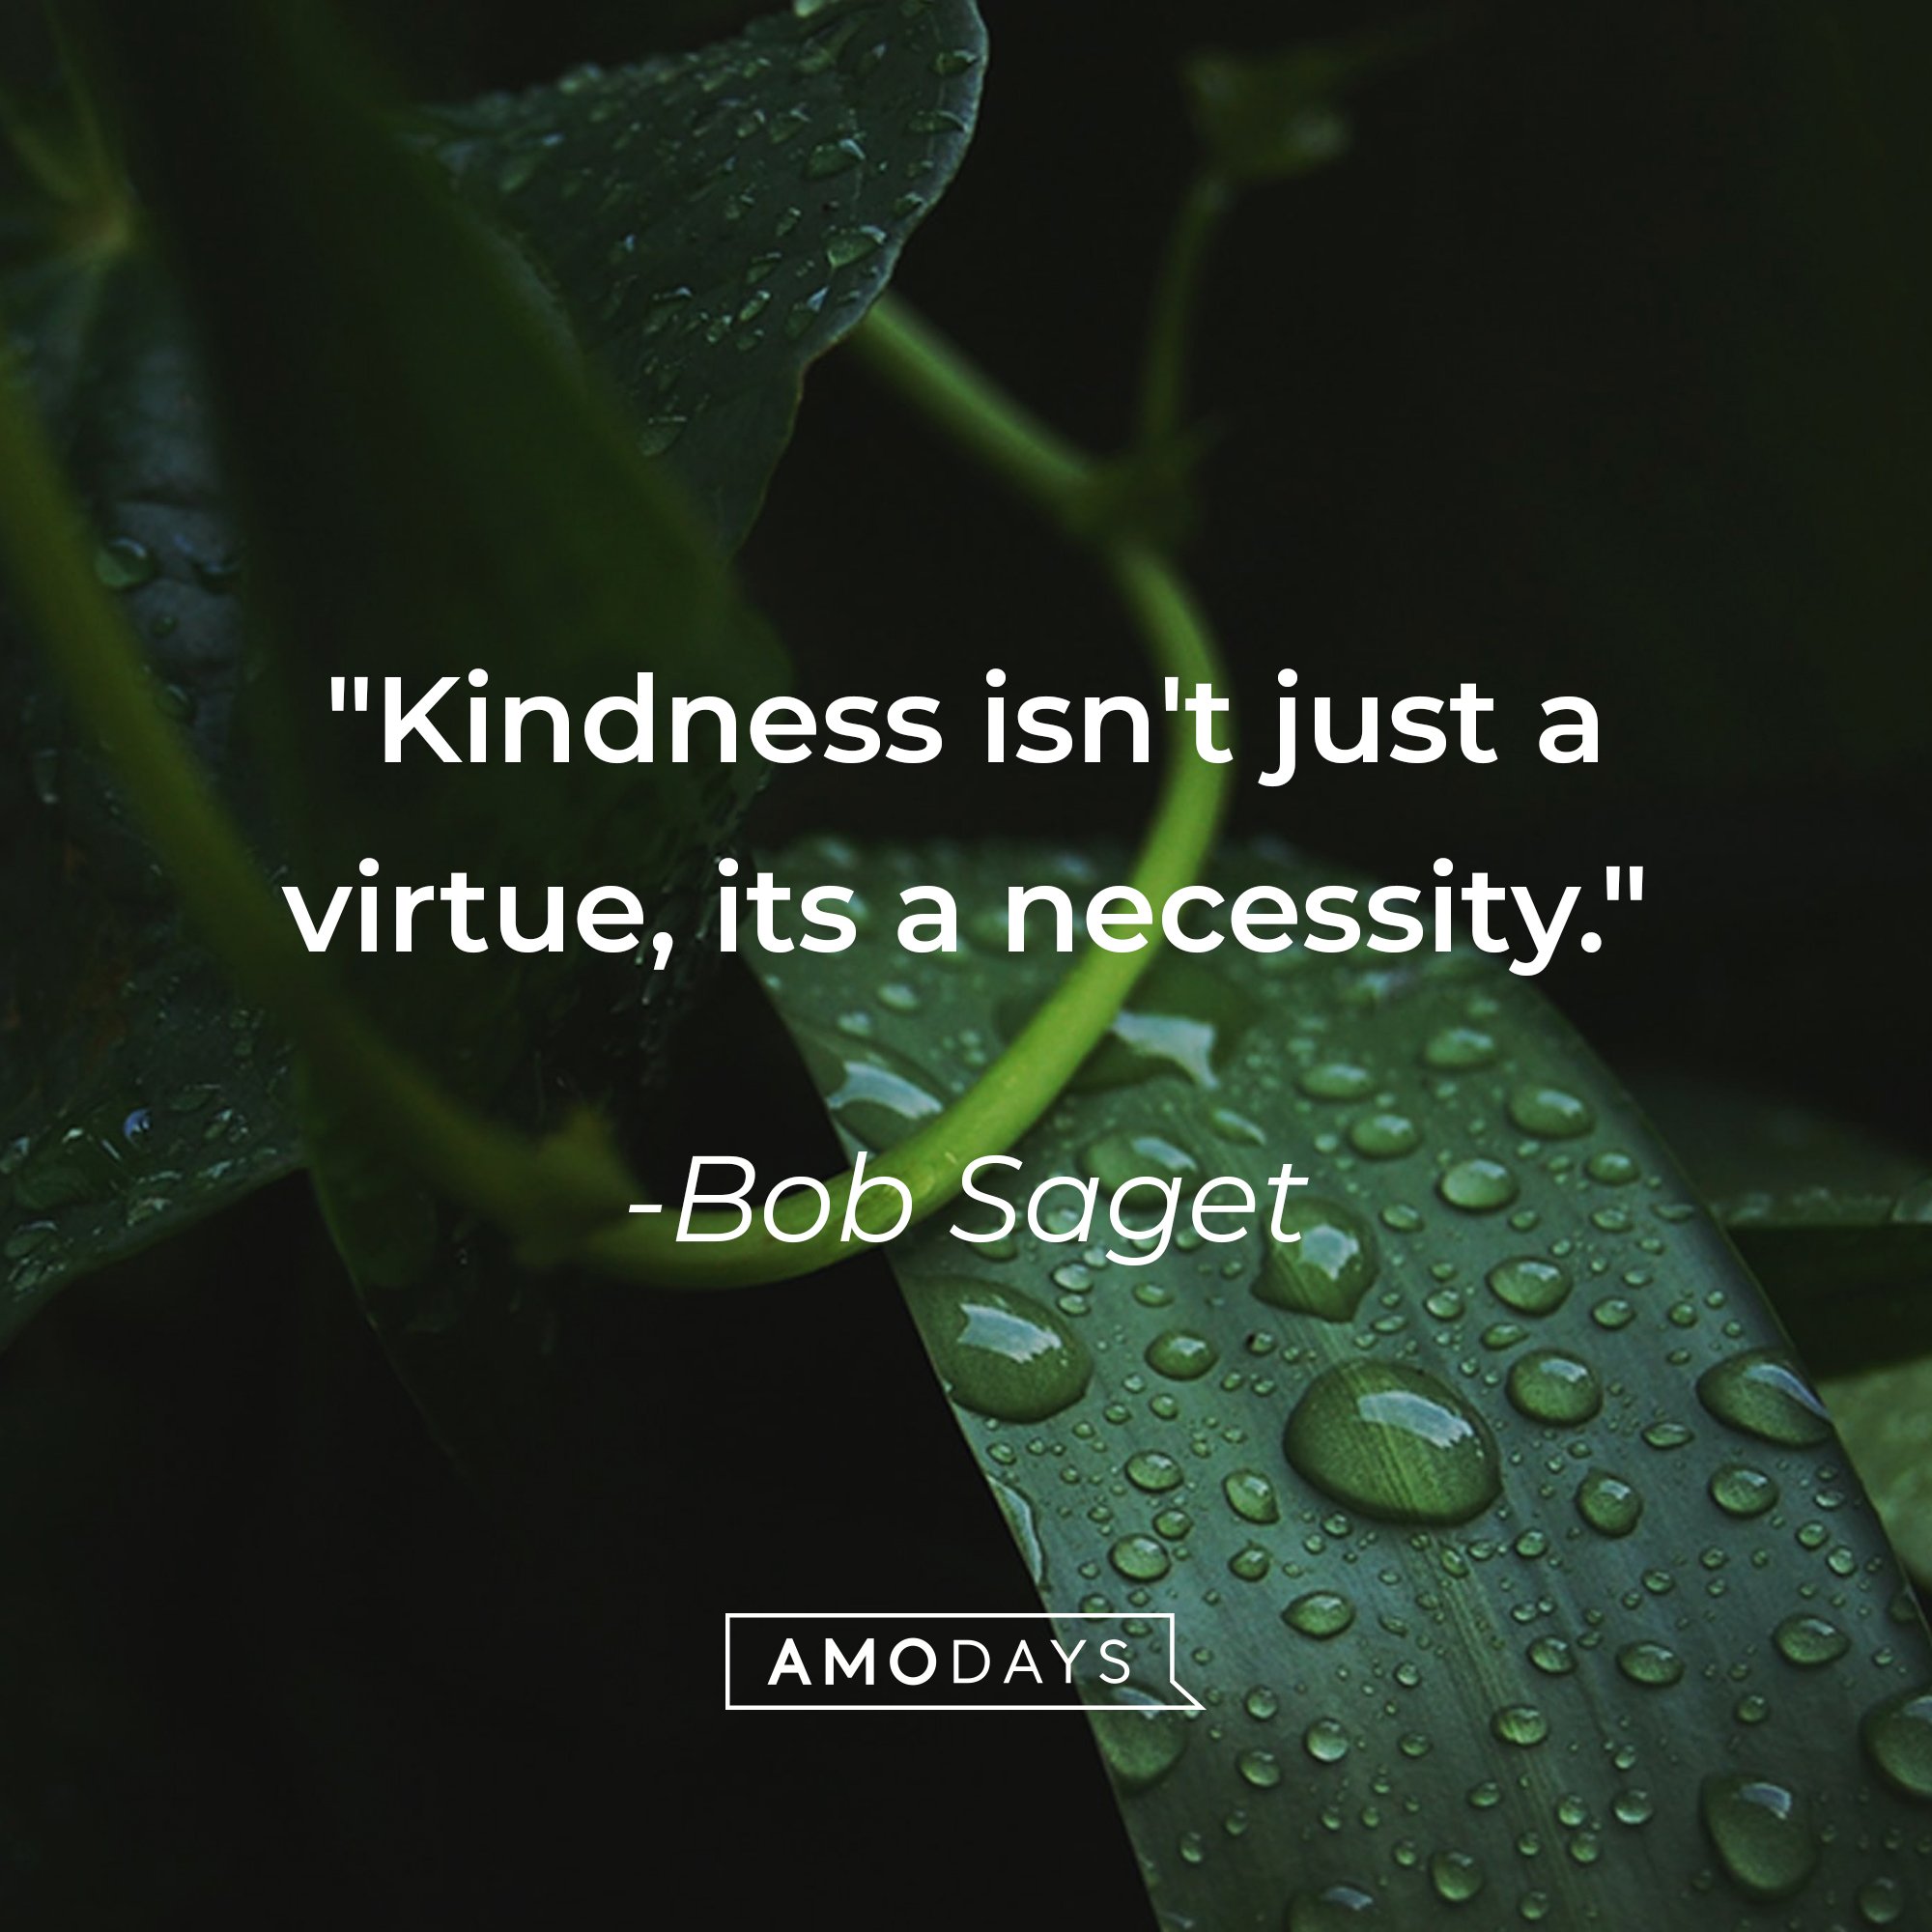  Bob Saget’s quote: "Kindness isn't just a virtue, it's a necessity." | Image: AmoDays